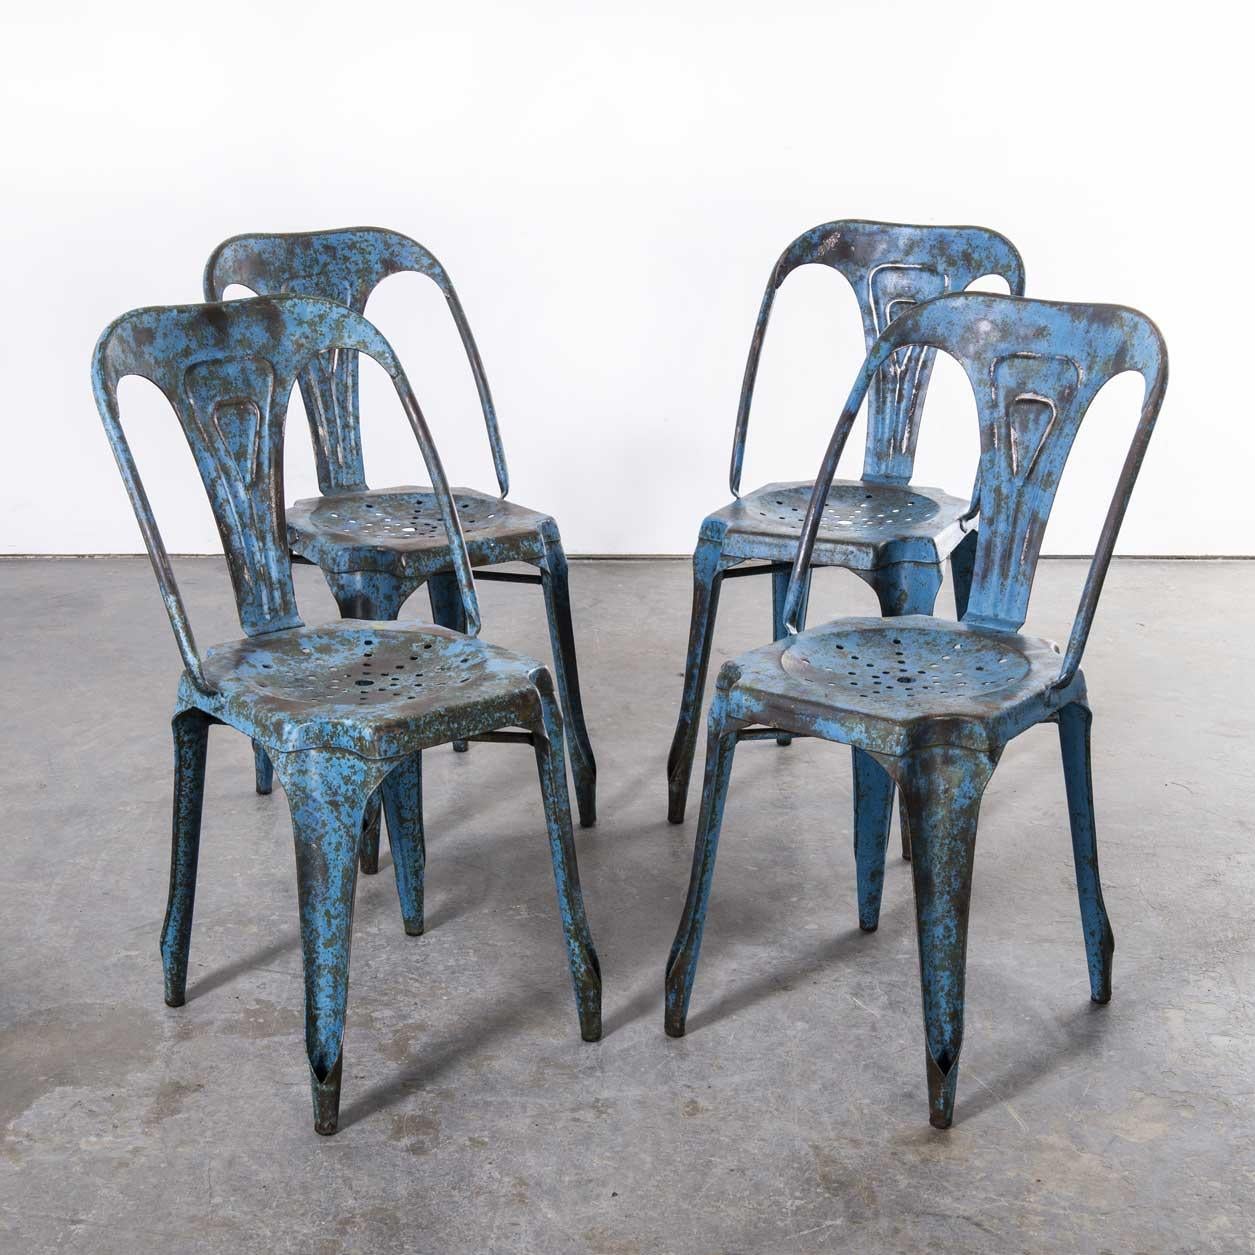 Mid-20th Century 1950's Original French Multipl's Table And Chair Set - Blue For Sale